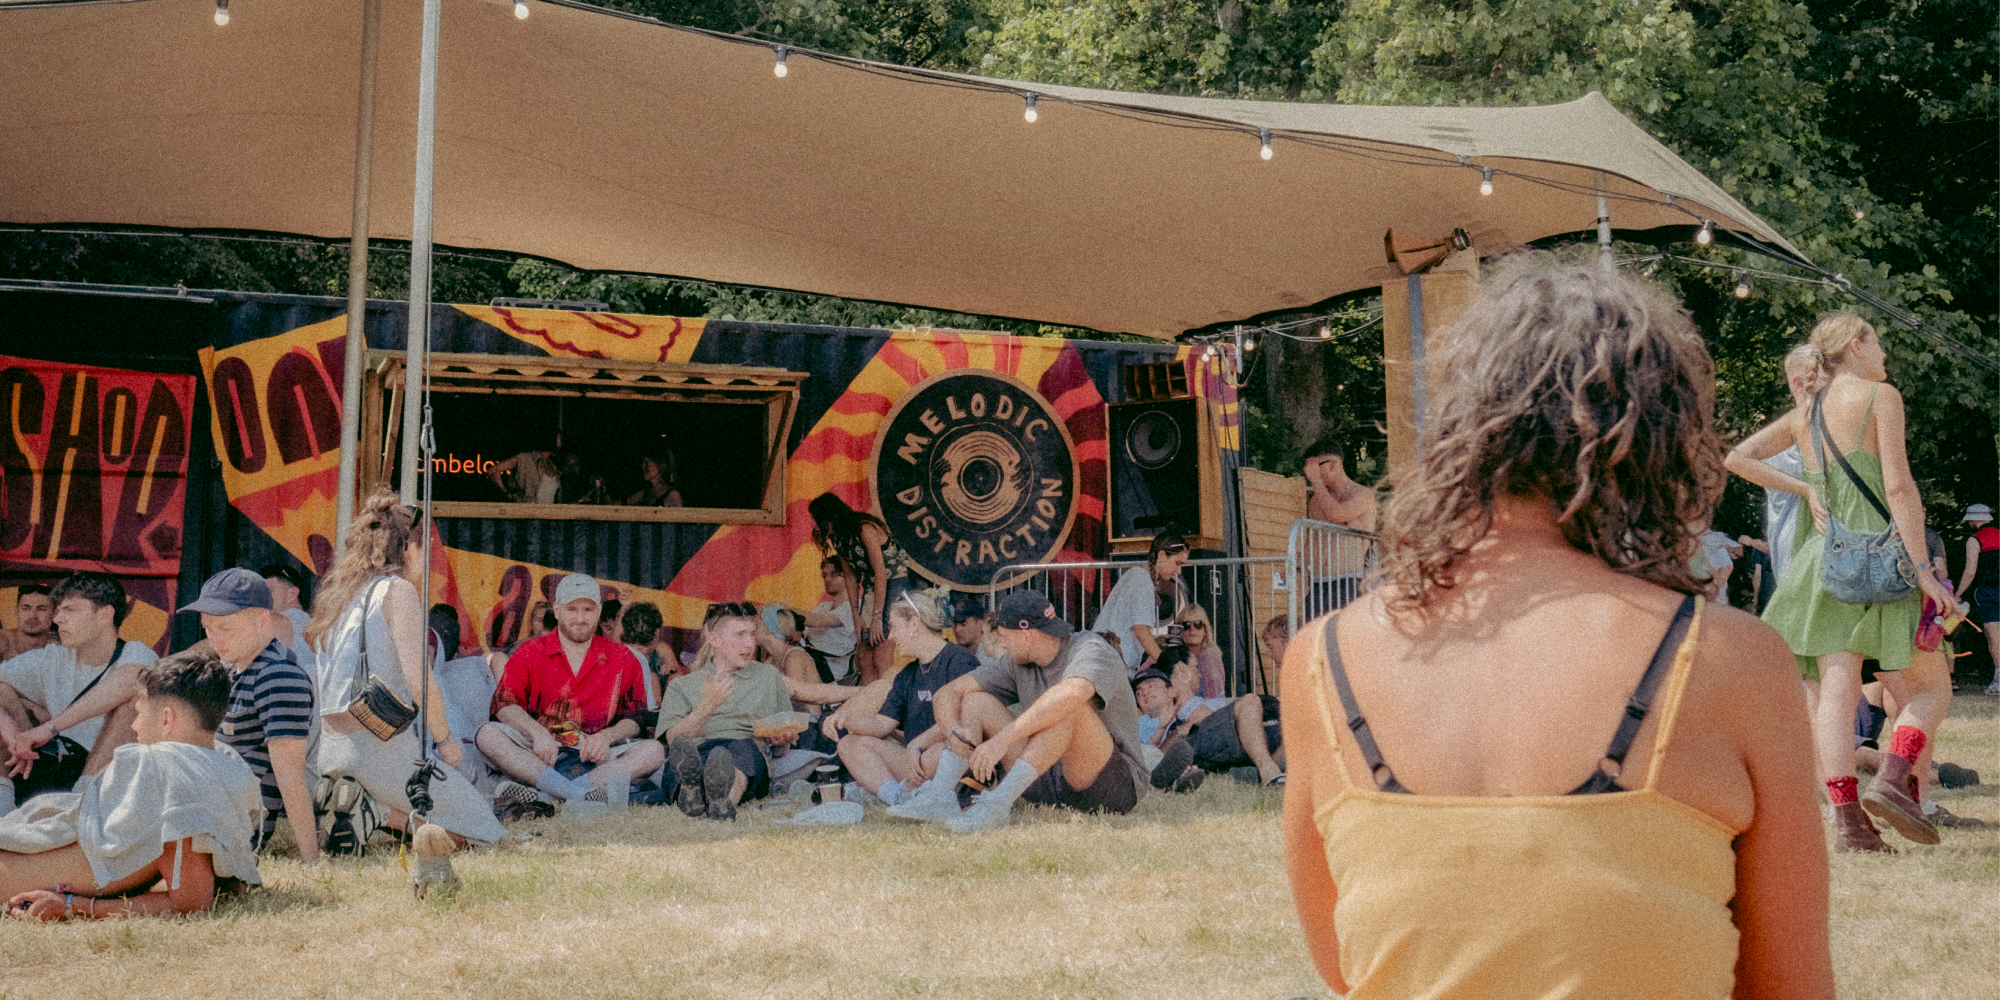 Audio-Technica x Melodic Distraction x NAM Sound System beim Gottwood Festival